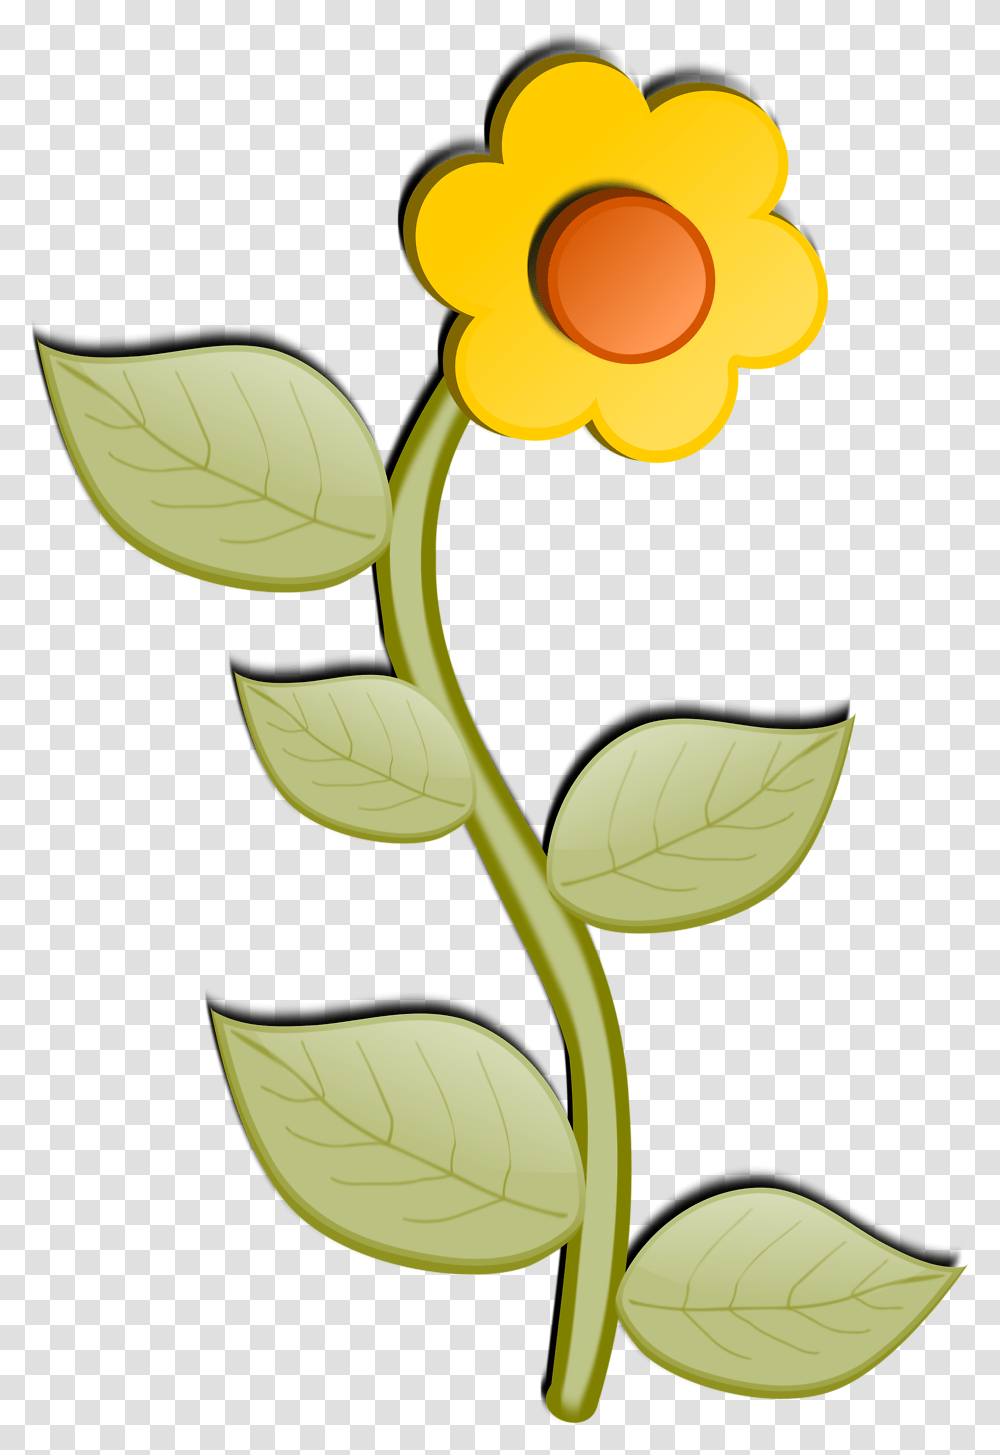 This Free Clip Arts Design Of Flower Art Cartoon Flowers Clear Background, Plant, Leaf, Blossom, Petal Transparent Png